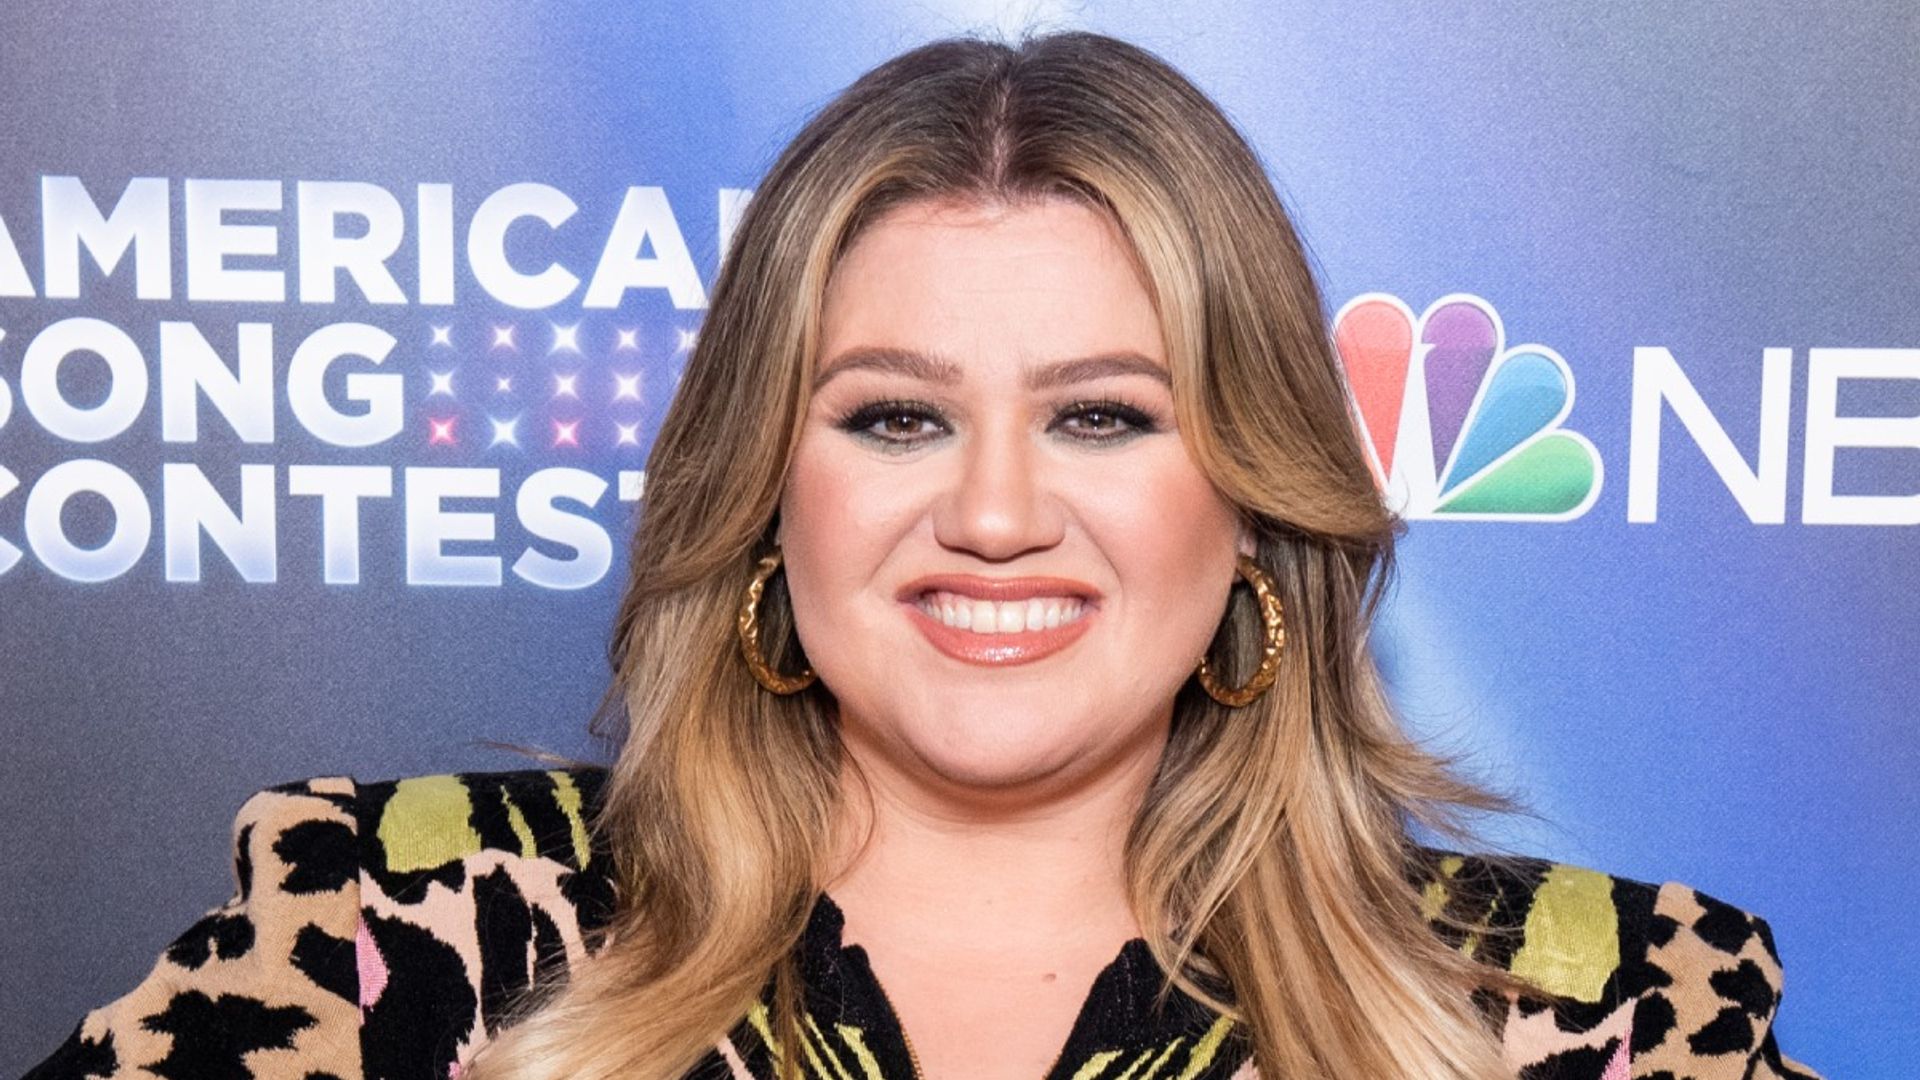 Kelly Clarkson announces incredible news that'll thrill fans of her show